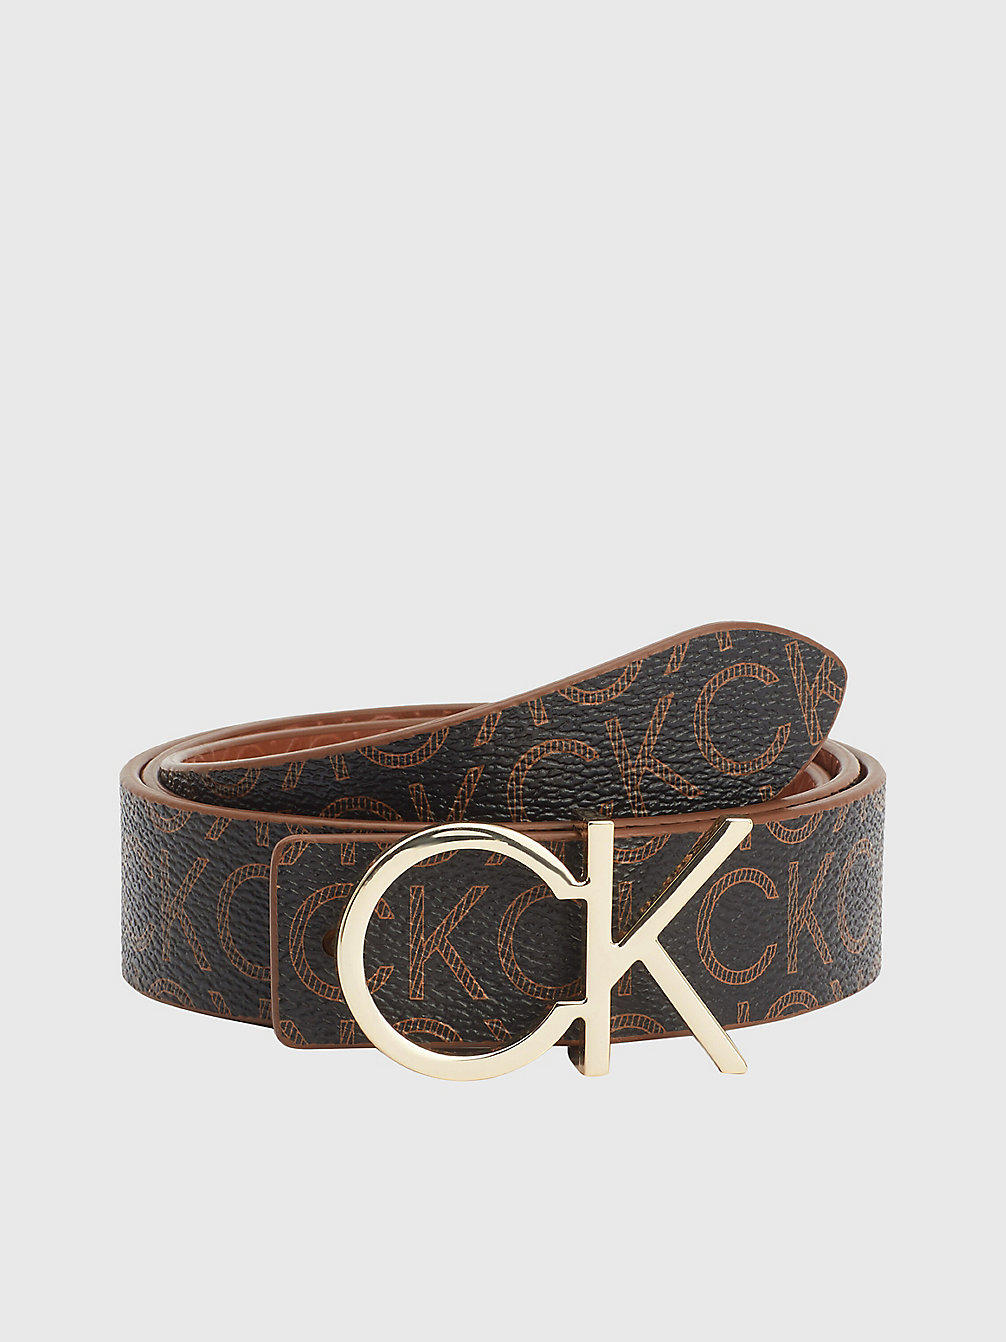 COGNAC / BROWN MONO Recycled Reversible Leather Belt undefined women Calvin Klein